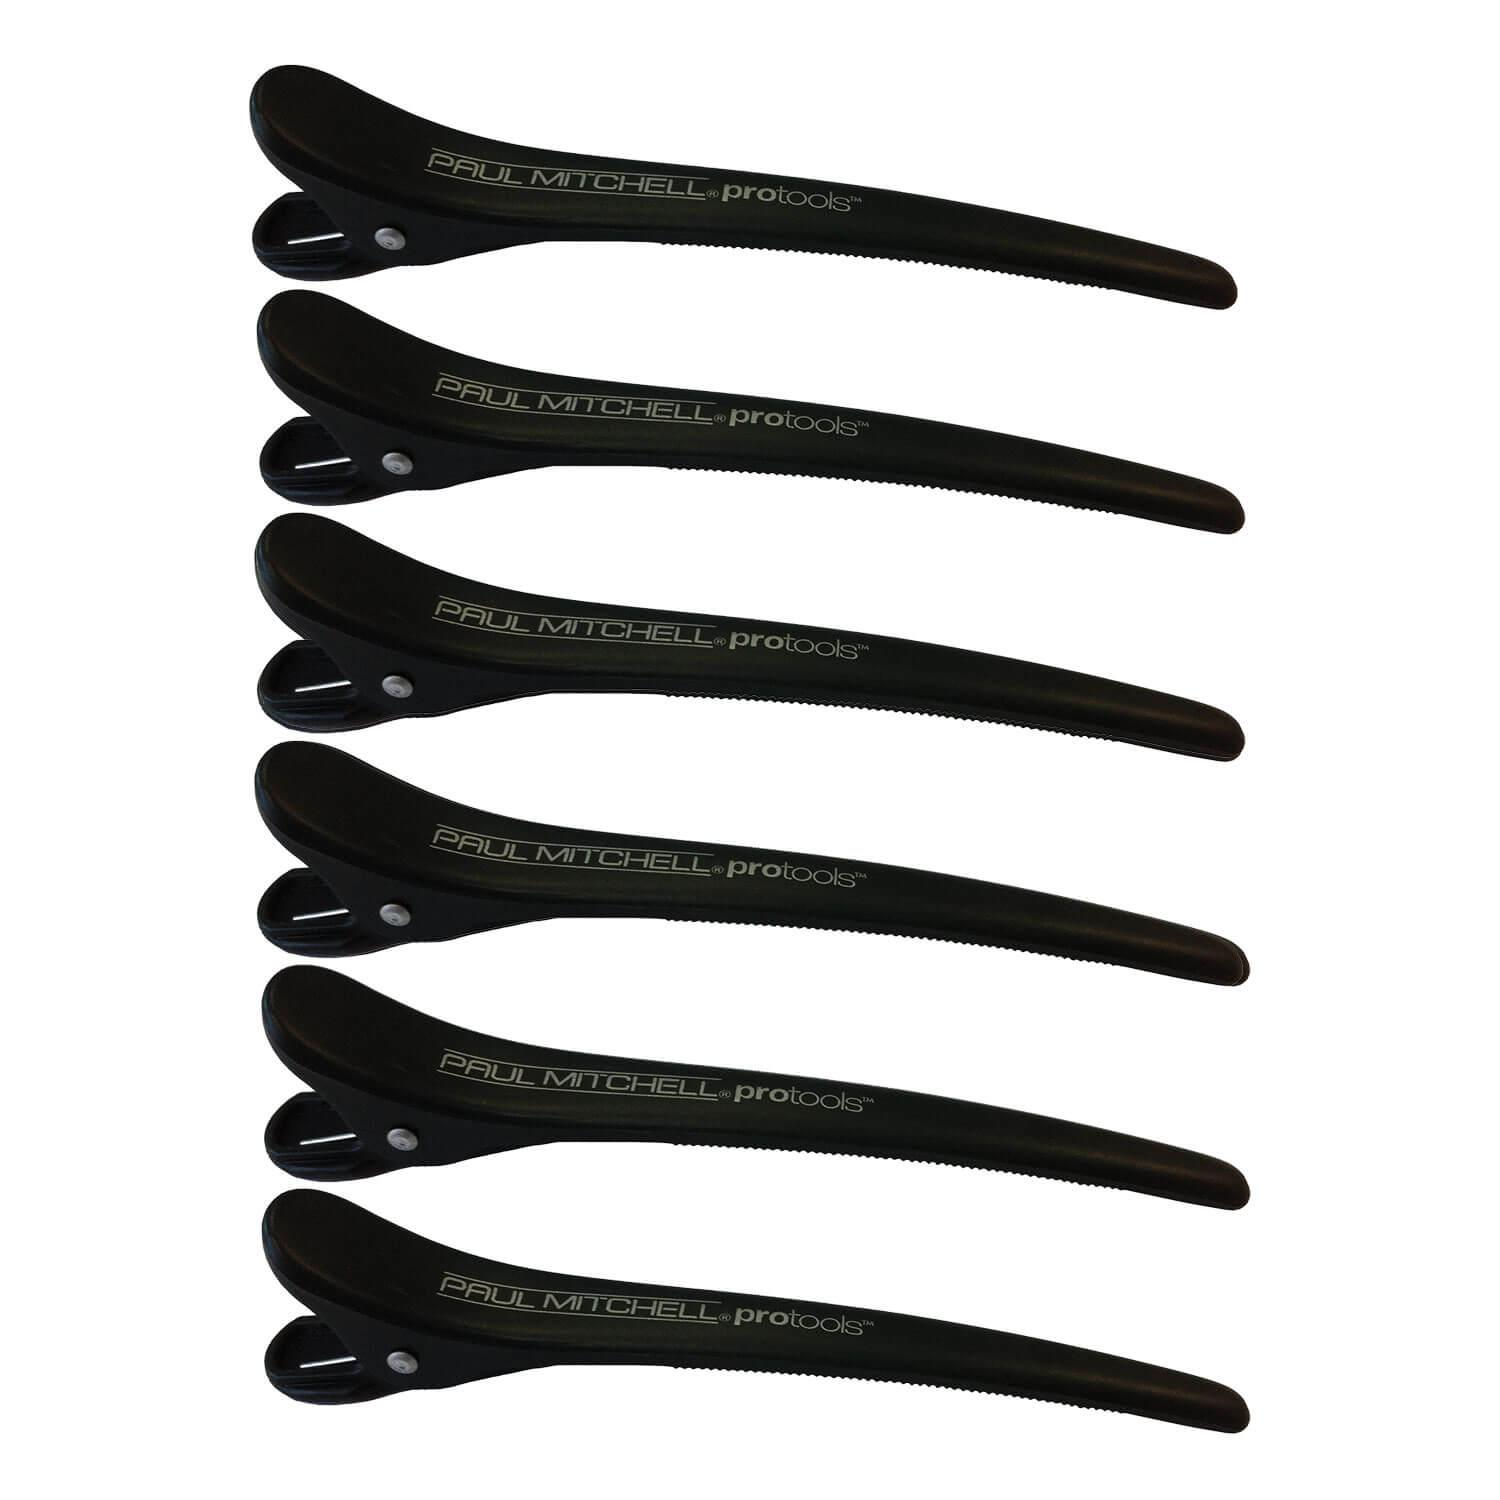 Paul Mitchell Tools - Clips